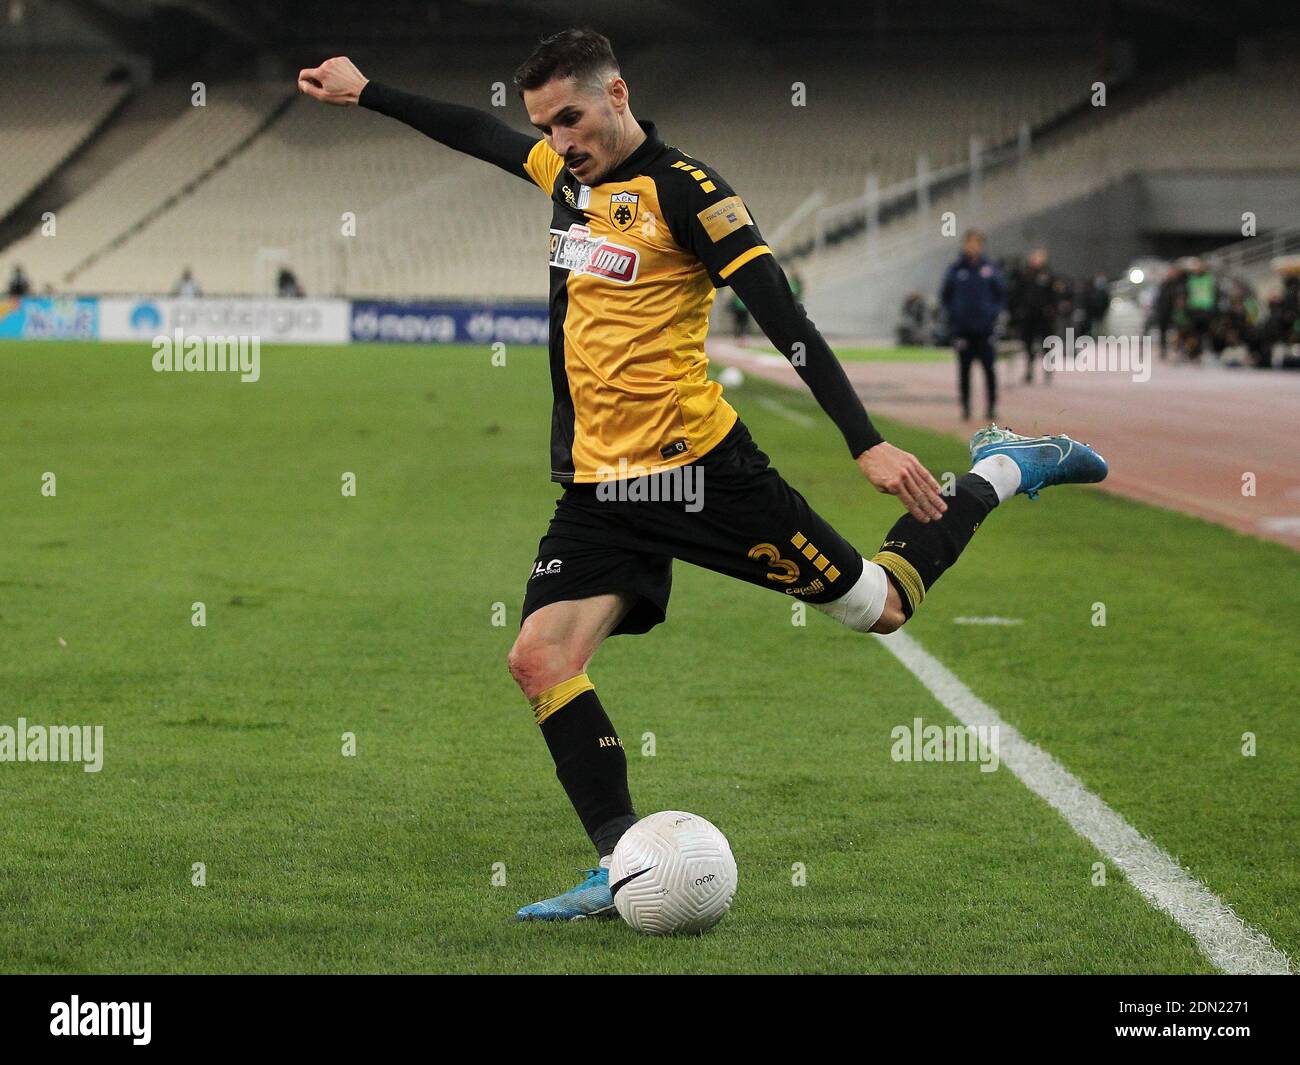 Athens, Greece. 16th Dec, 2020. Hélder Lopes of AEK Athens during the Super  League Greece match at Olympic Stadium, Athens Picture by Yannis  Halas/Focus Images Ltd /Sipa USA 16/12/2020 Credit: Sipa USA/Alamy